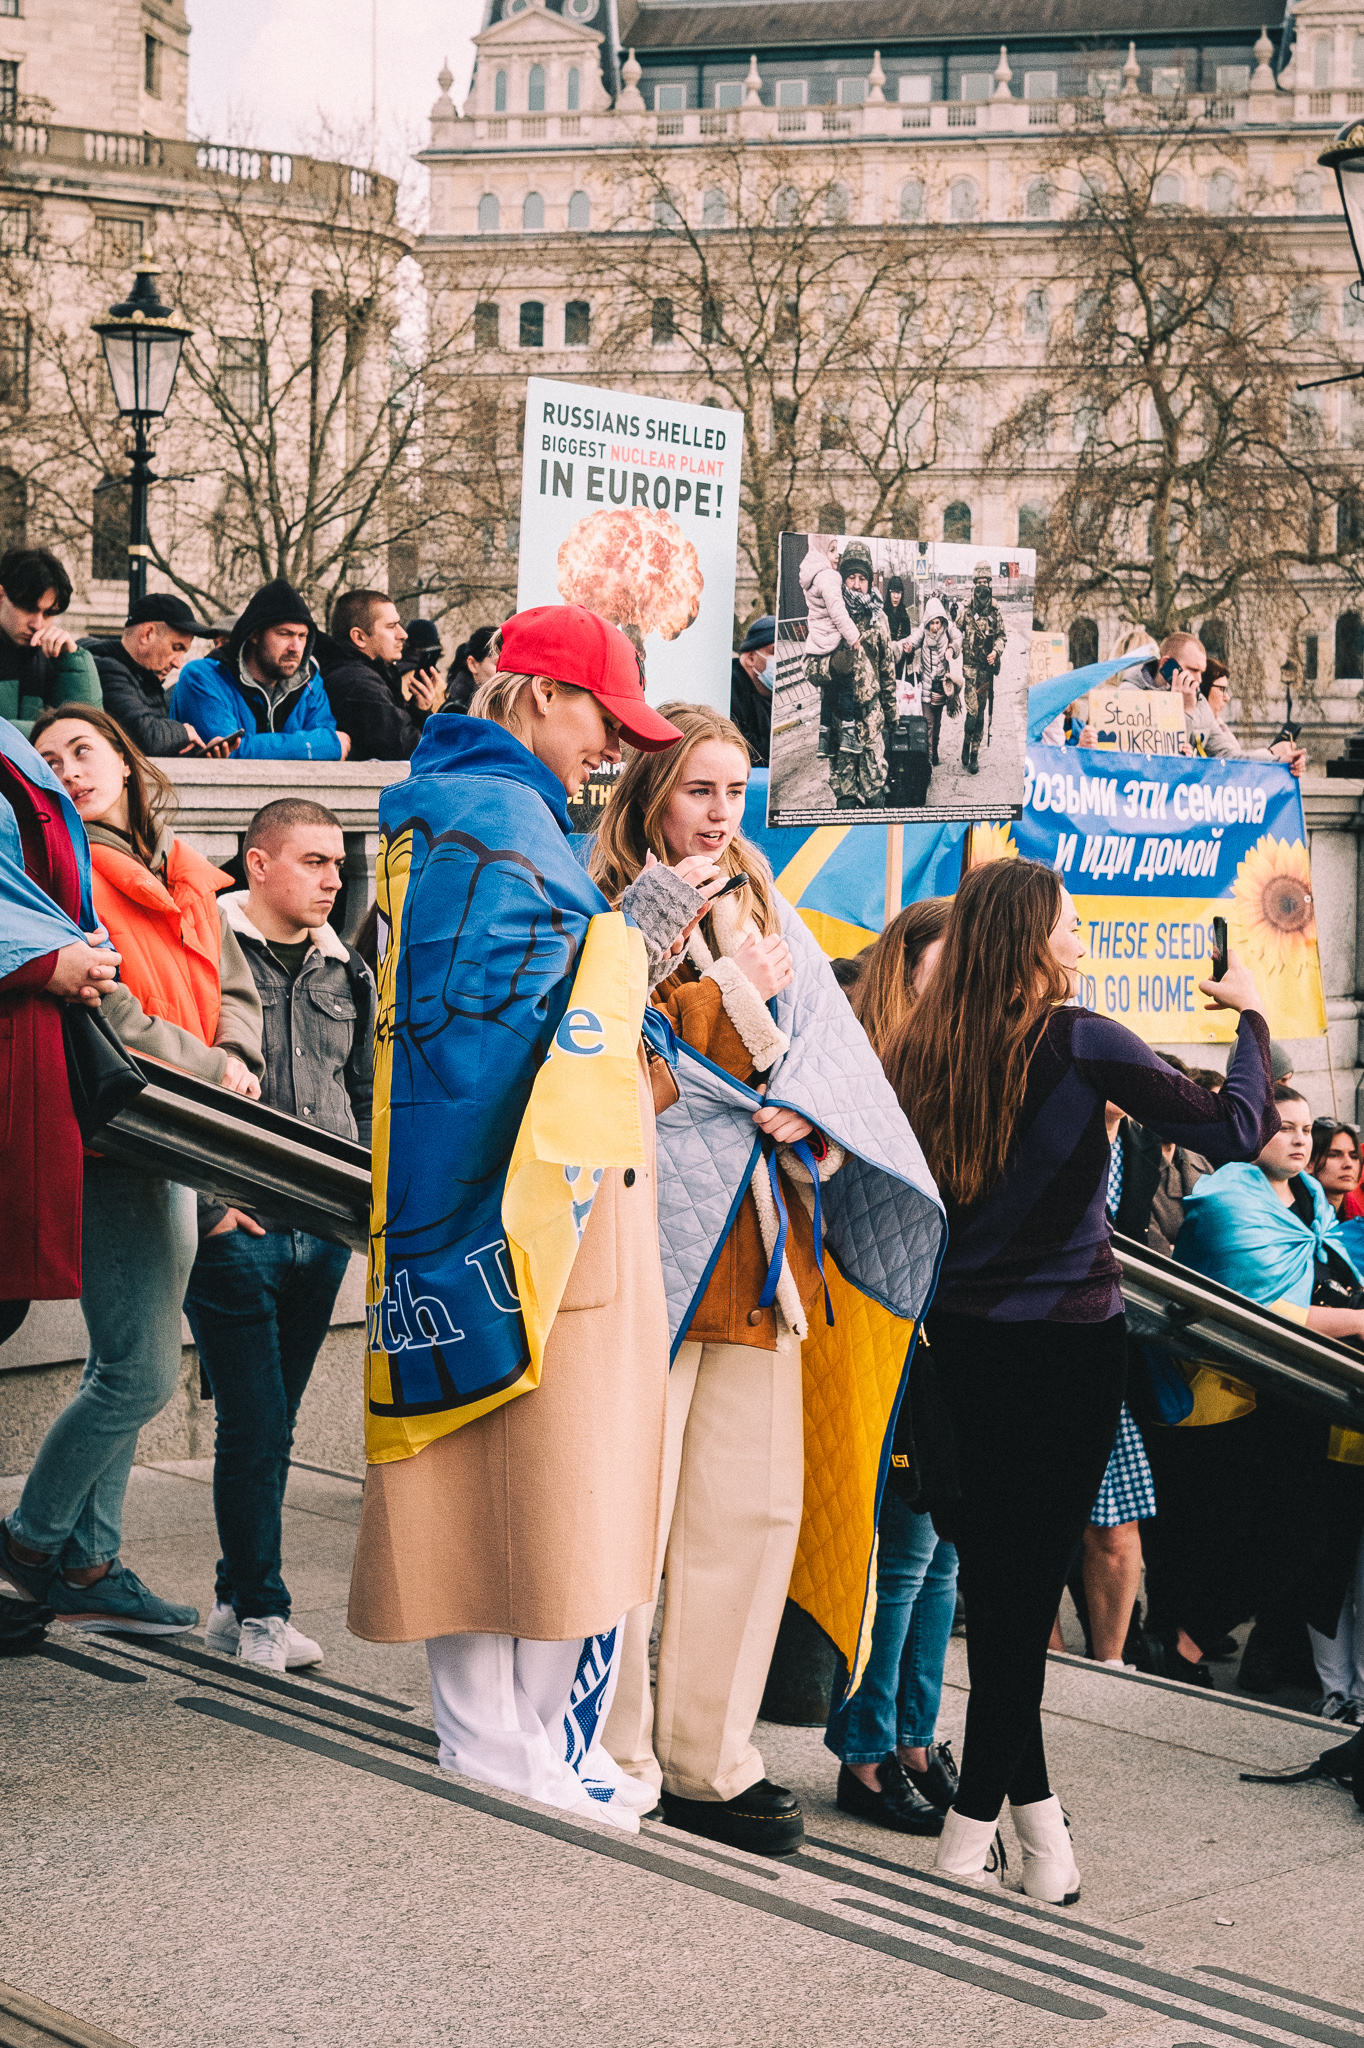 A group of protesters at the rally to support Ukraine at Trafalgar Square on the steps of the National Gallery